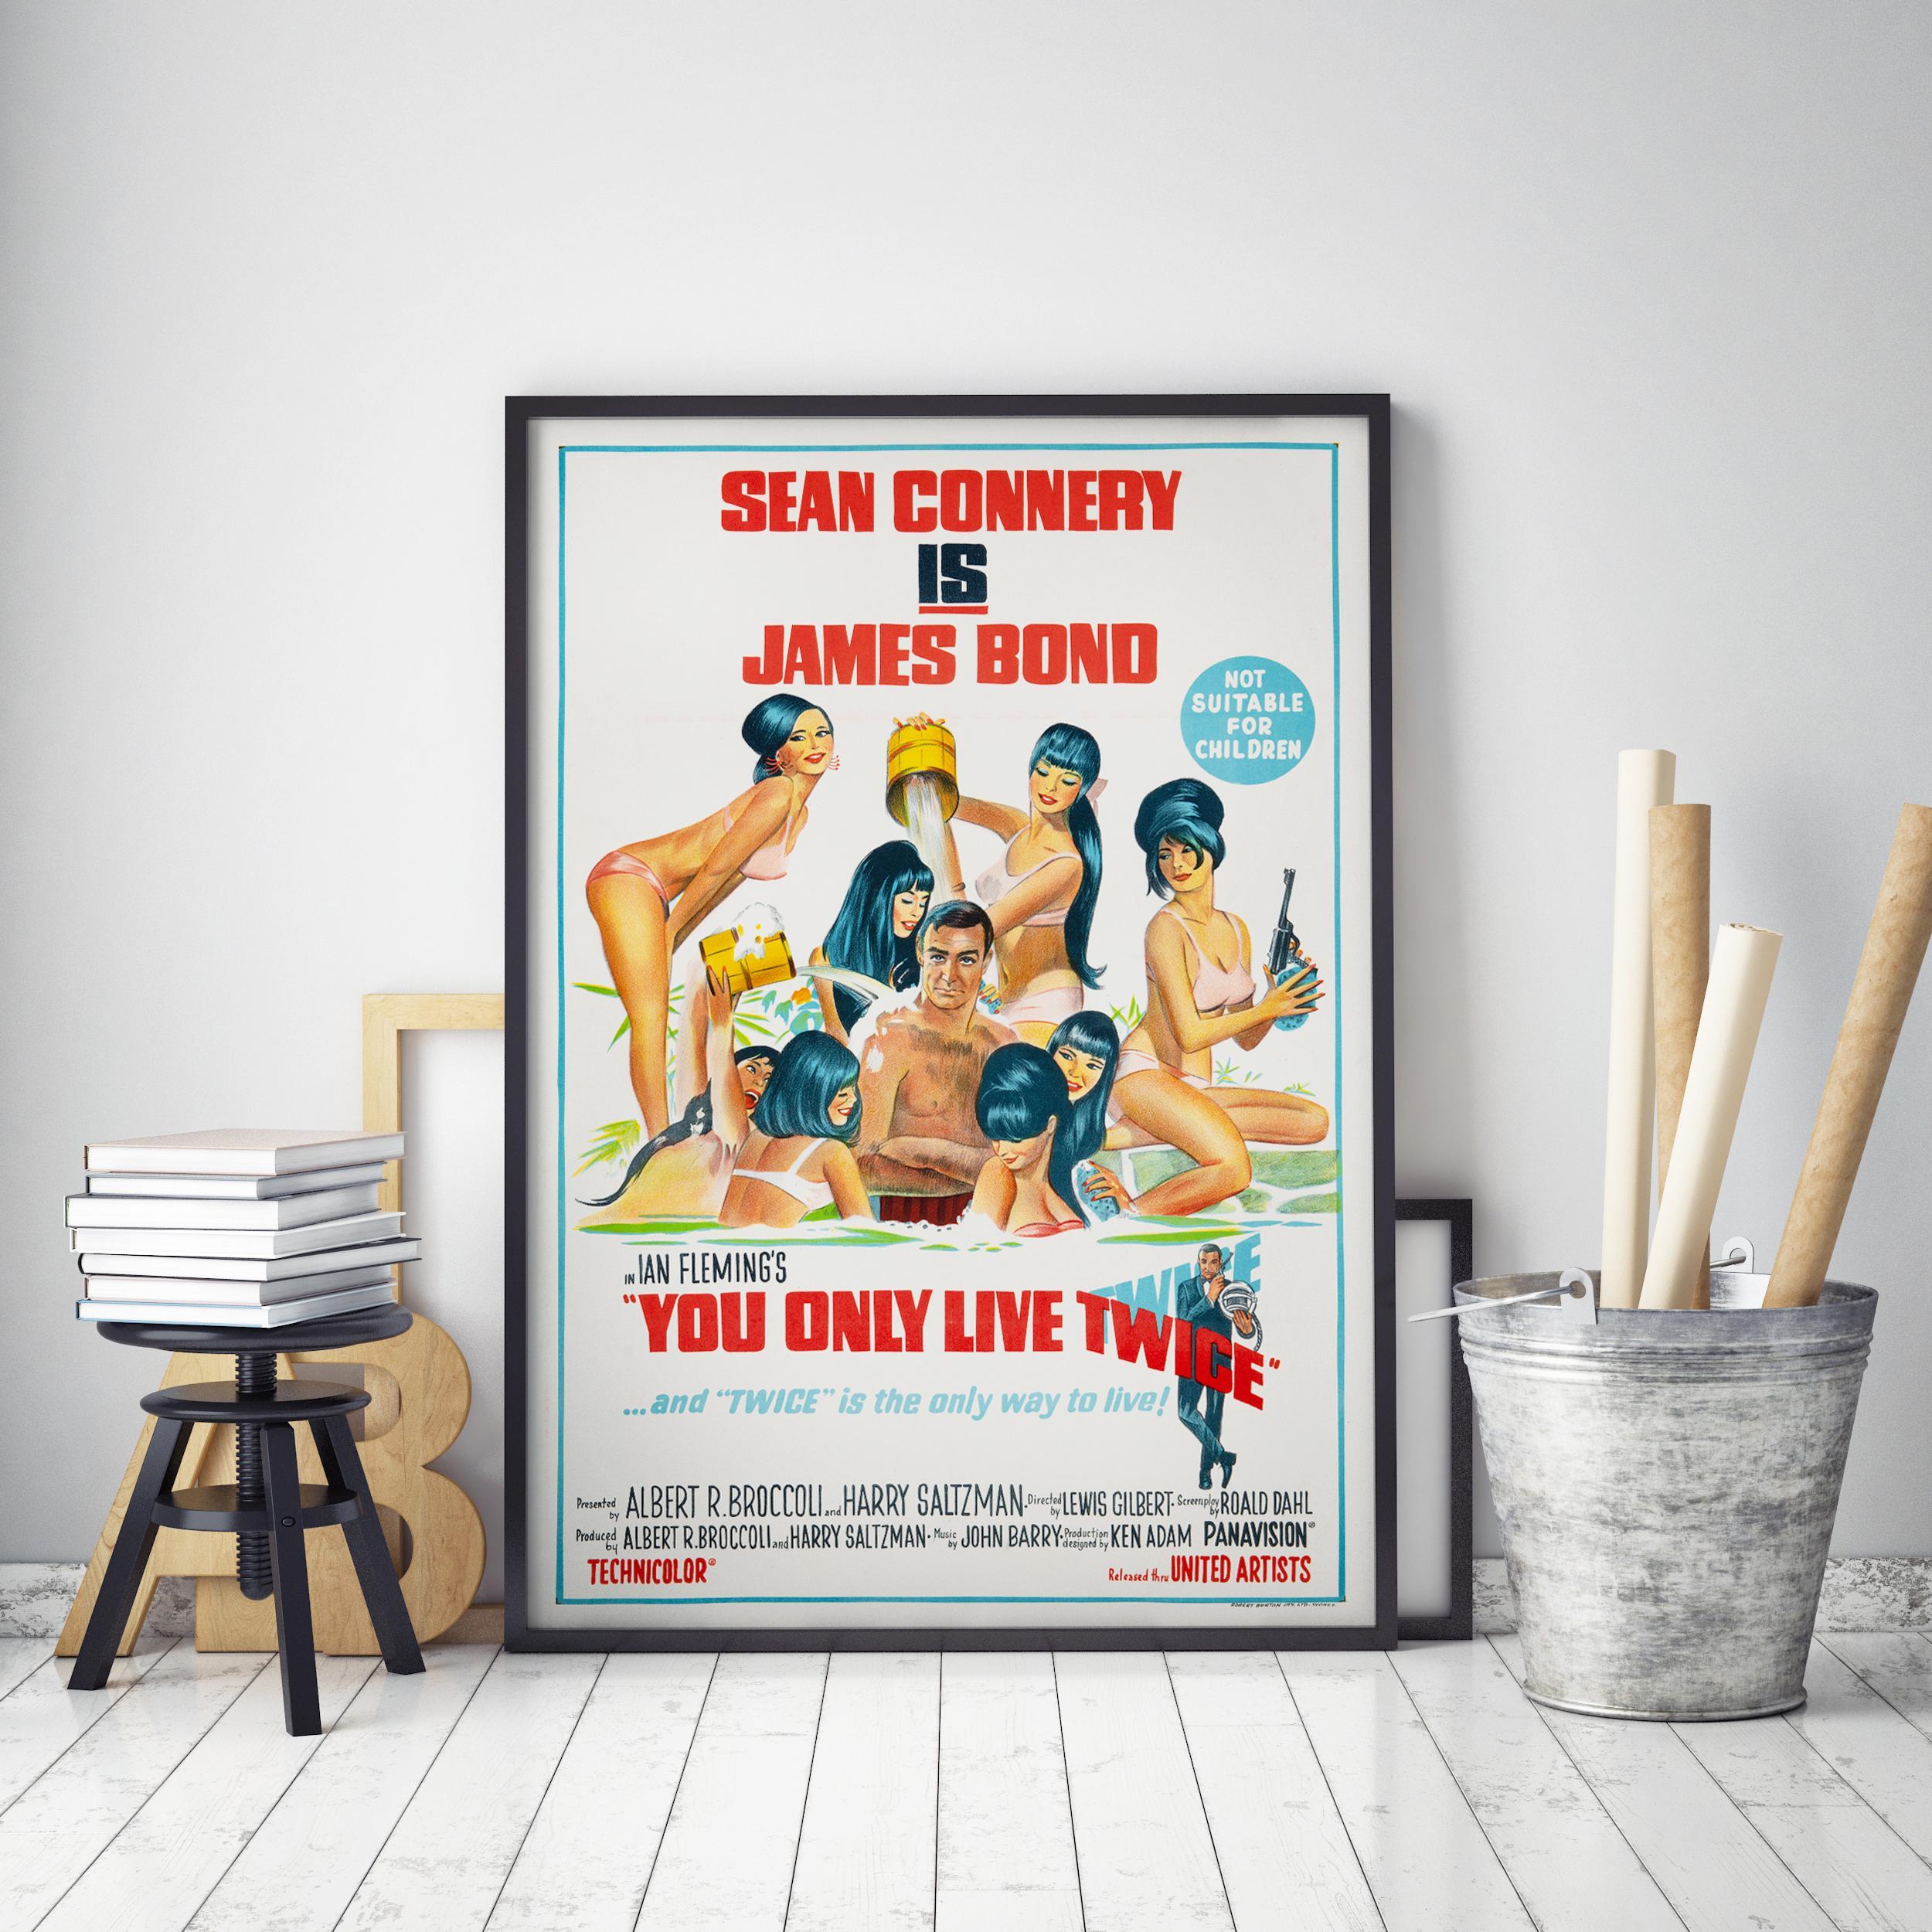 The fifth film in EON Productions' James Bond series and the last of Sean Connery's first stint starring as the suave secret agent, it was announced during filming of 'You Only Live Twice' that Connery would retire from the role, although he later